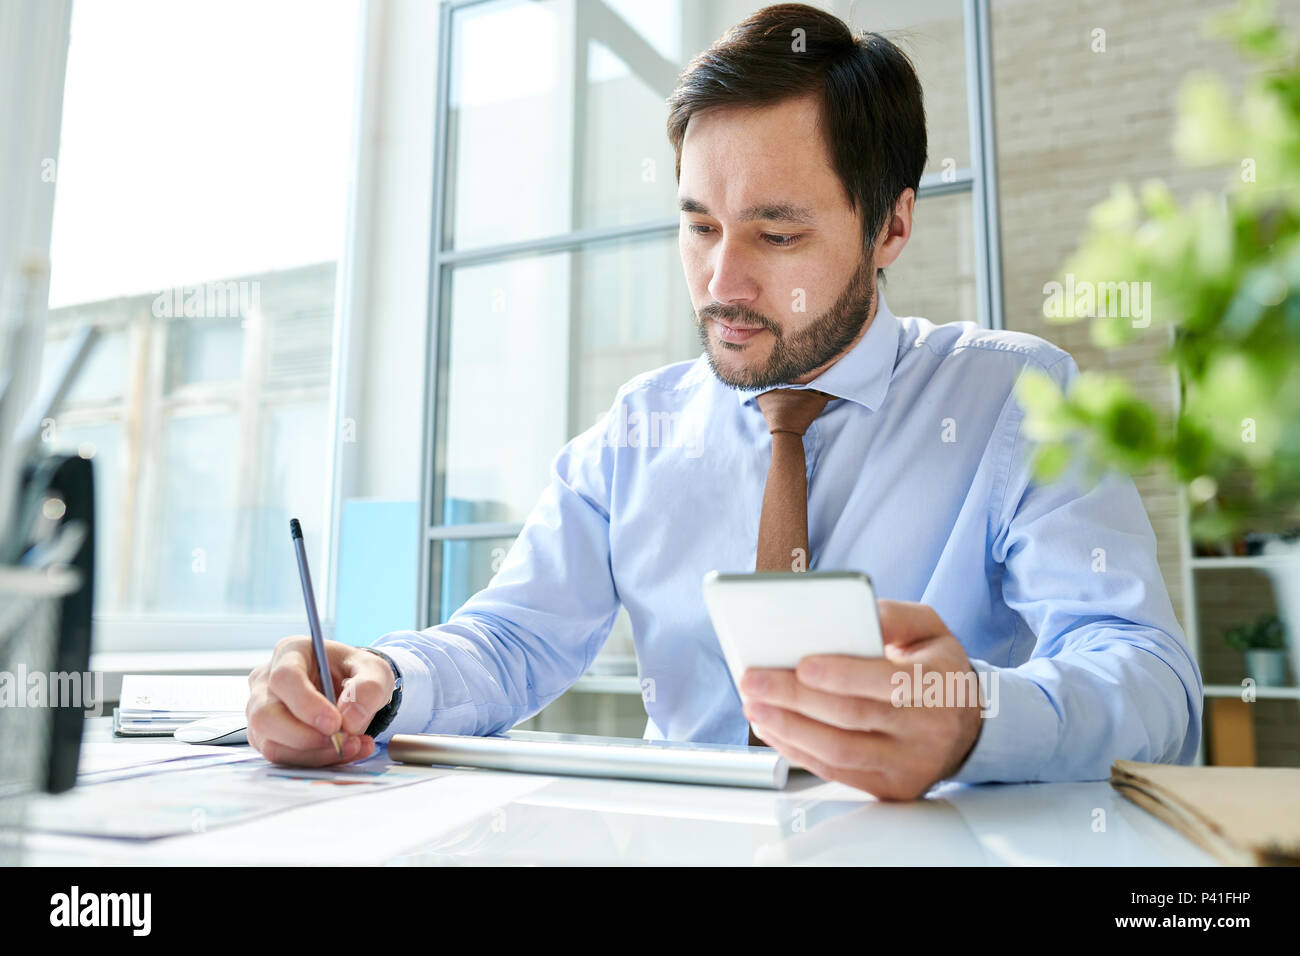 Employee working with smartphone in office Stock Photo